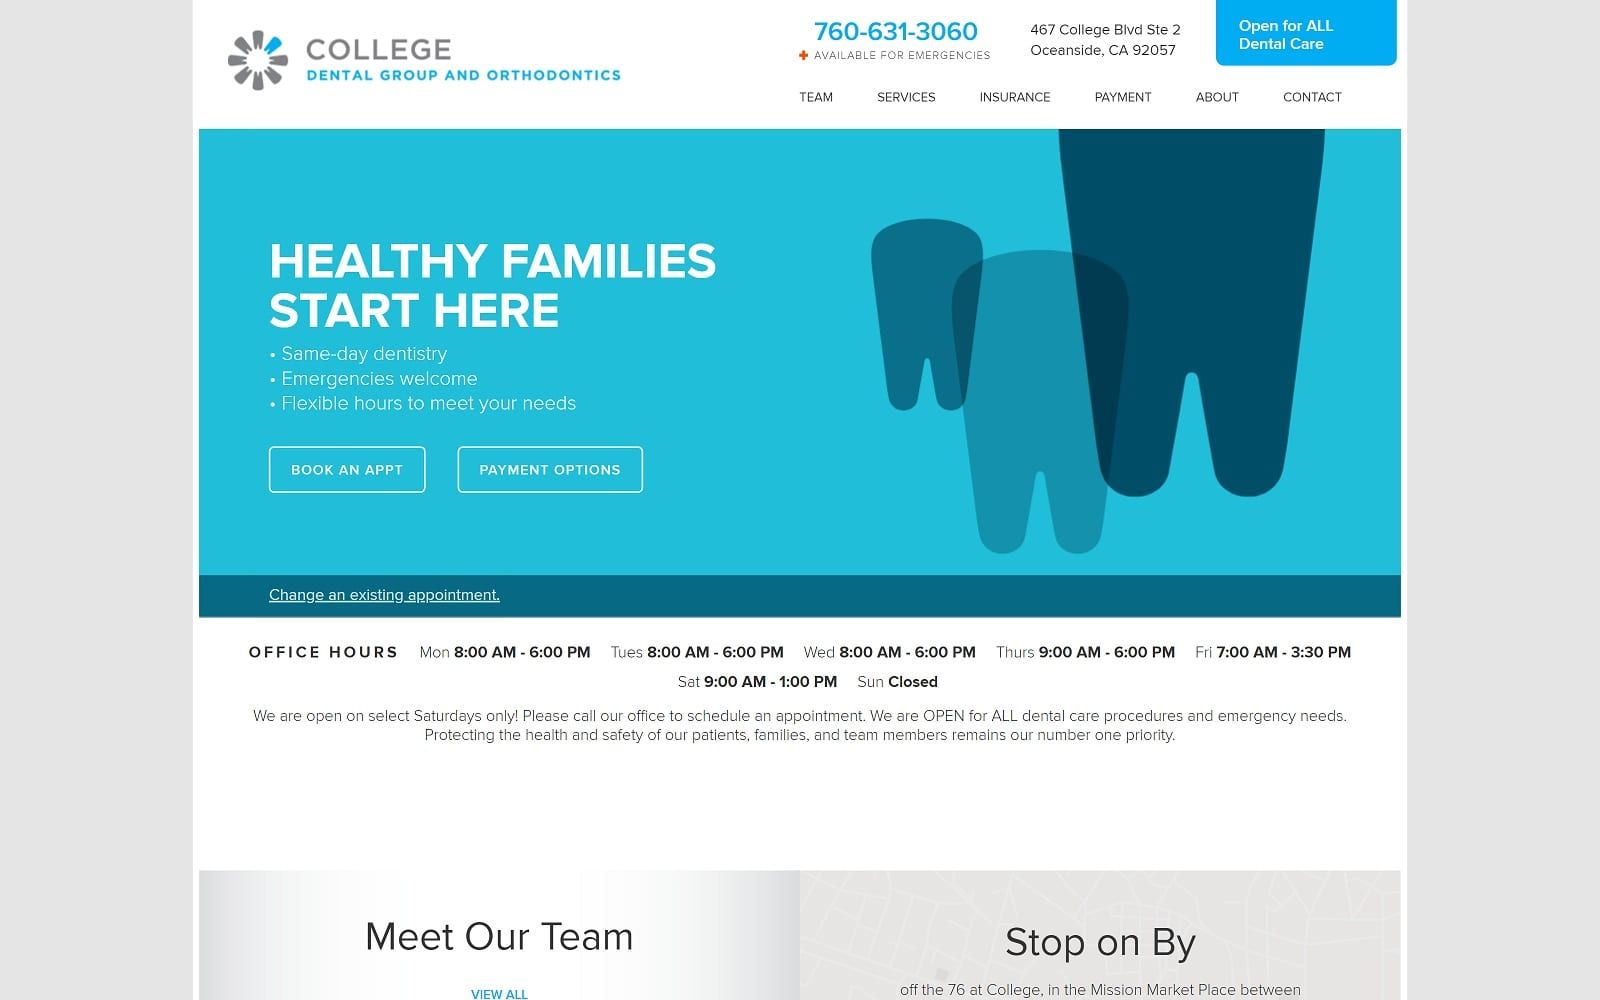 The screenshot of college dental group and orthodontics collegedentalgroup. Com website